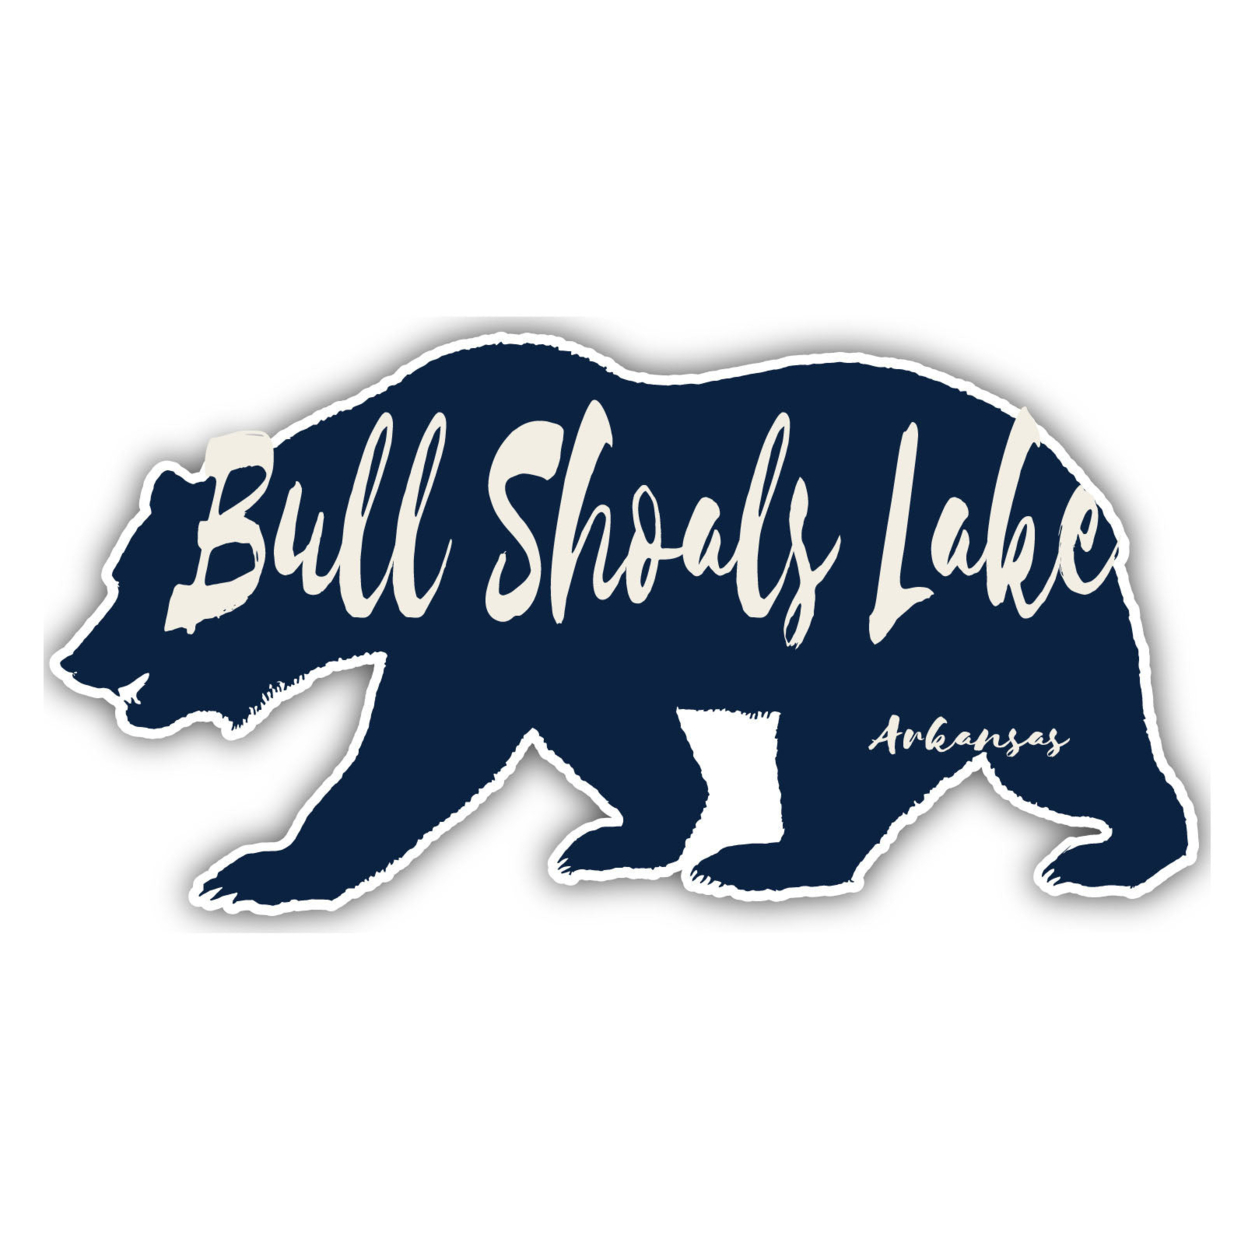 Bull Shoals Lake Arkansas Souvenir Decorative Stickers (Choose Theme And Size) - 4-Pack, 12-Inch, Camp Life